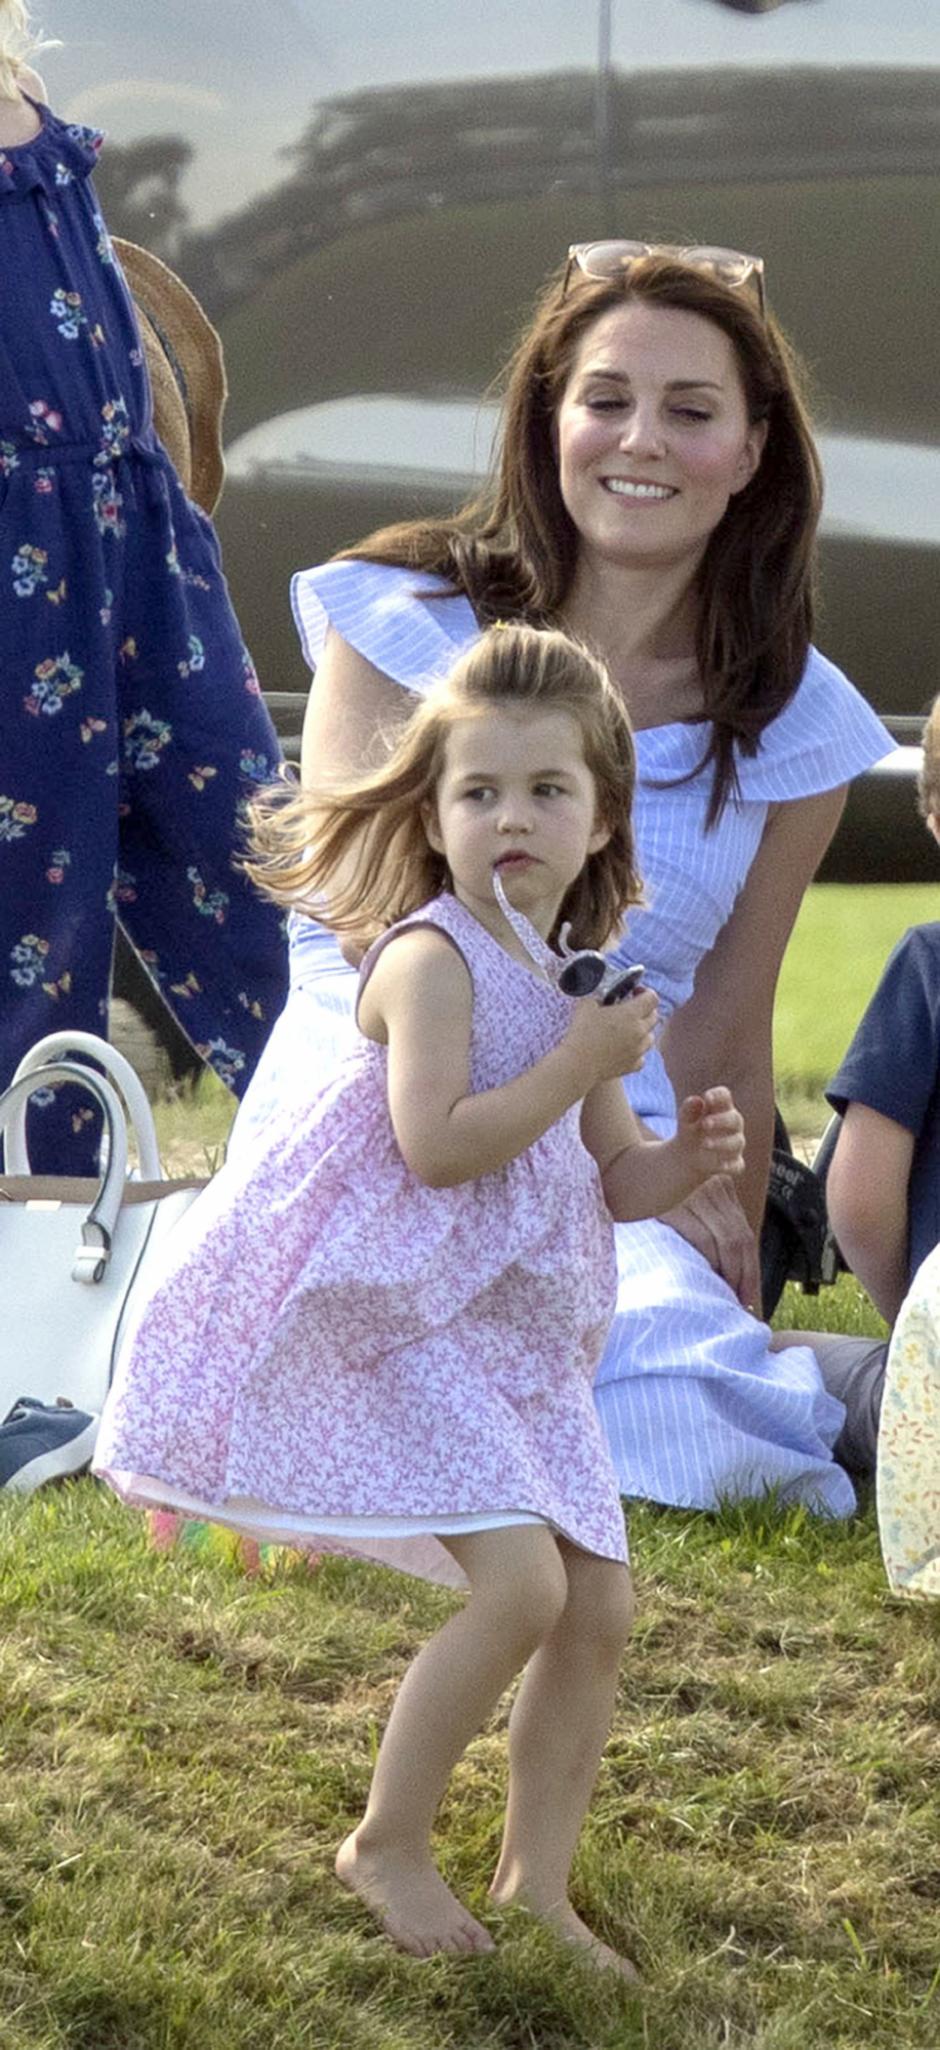 The Duchess of Cambridge and her daughter Princess Charlotte, as the Duke of Cambridge takes part in the Maserati Royal Charity Polo Trophy at the Beaufort Polo Club, Downfarm House, Westonbirt, Tetbury.